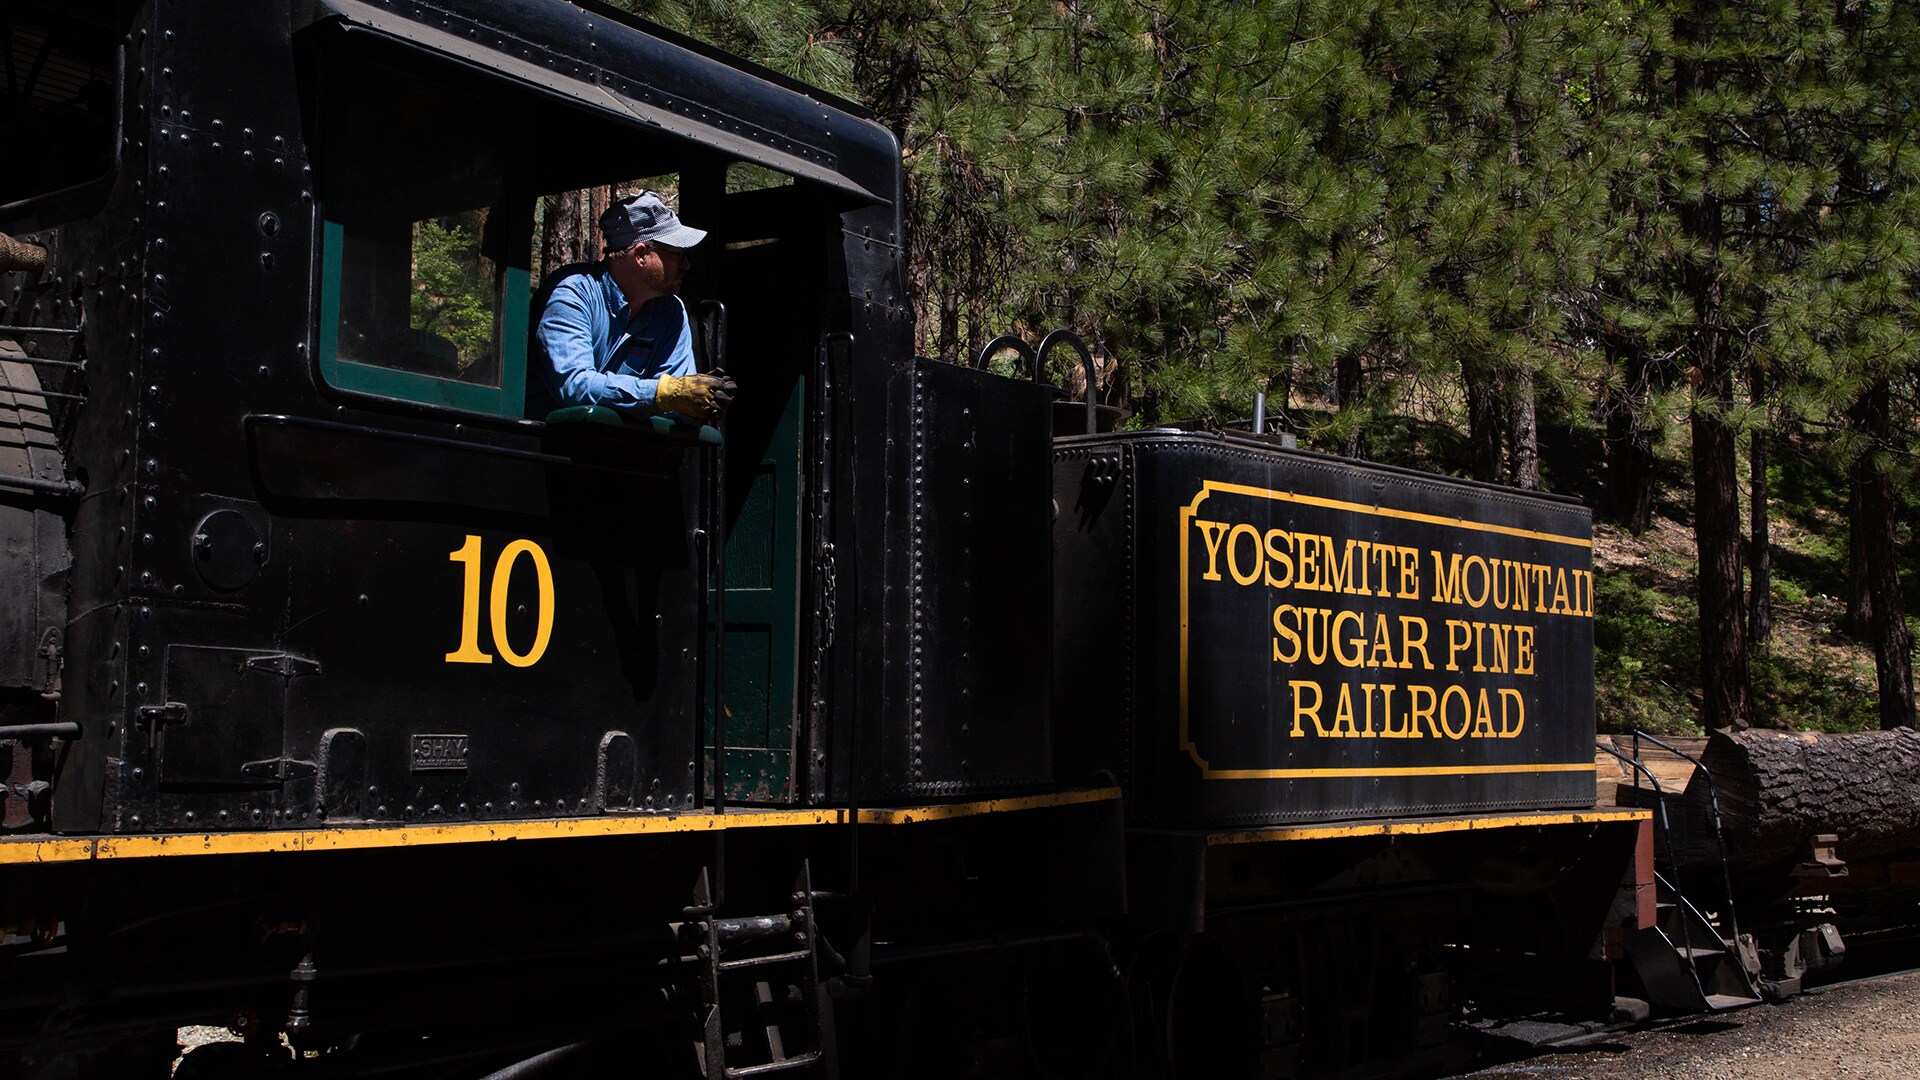 The Yosemite Mountain Sugar Pine Railroad takes visitors through the Sierra National Forest.